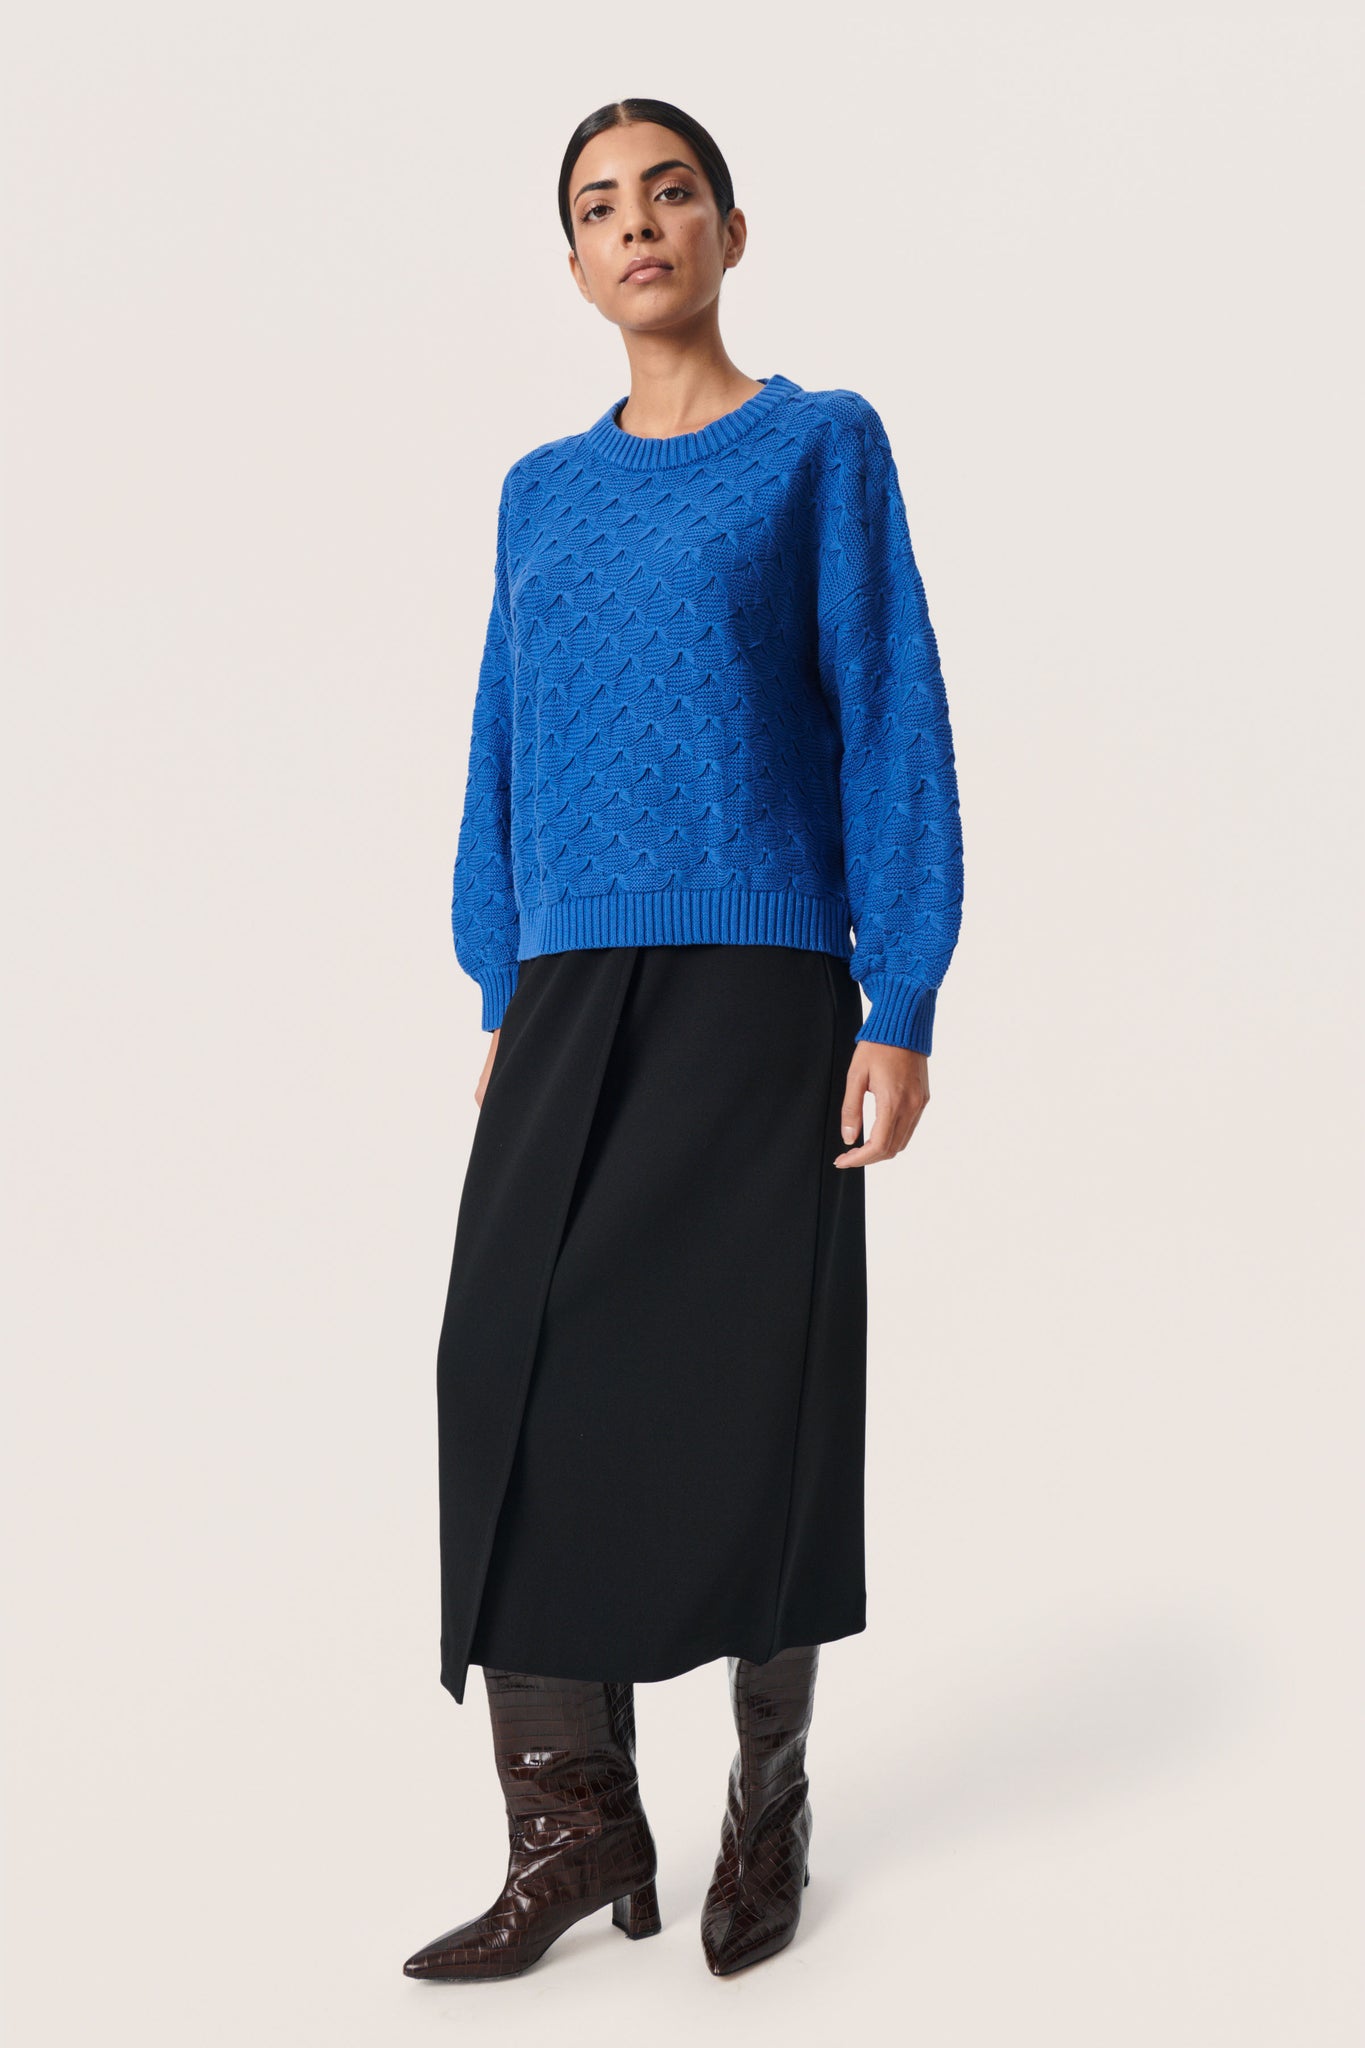 Soaked - Rava Ronia Pullover - Beaucoup Blue